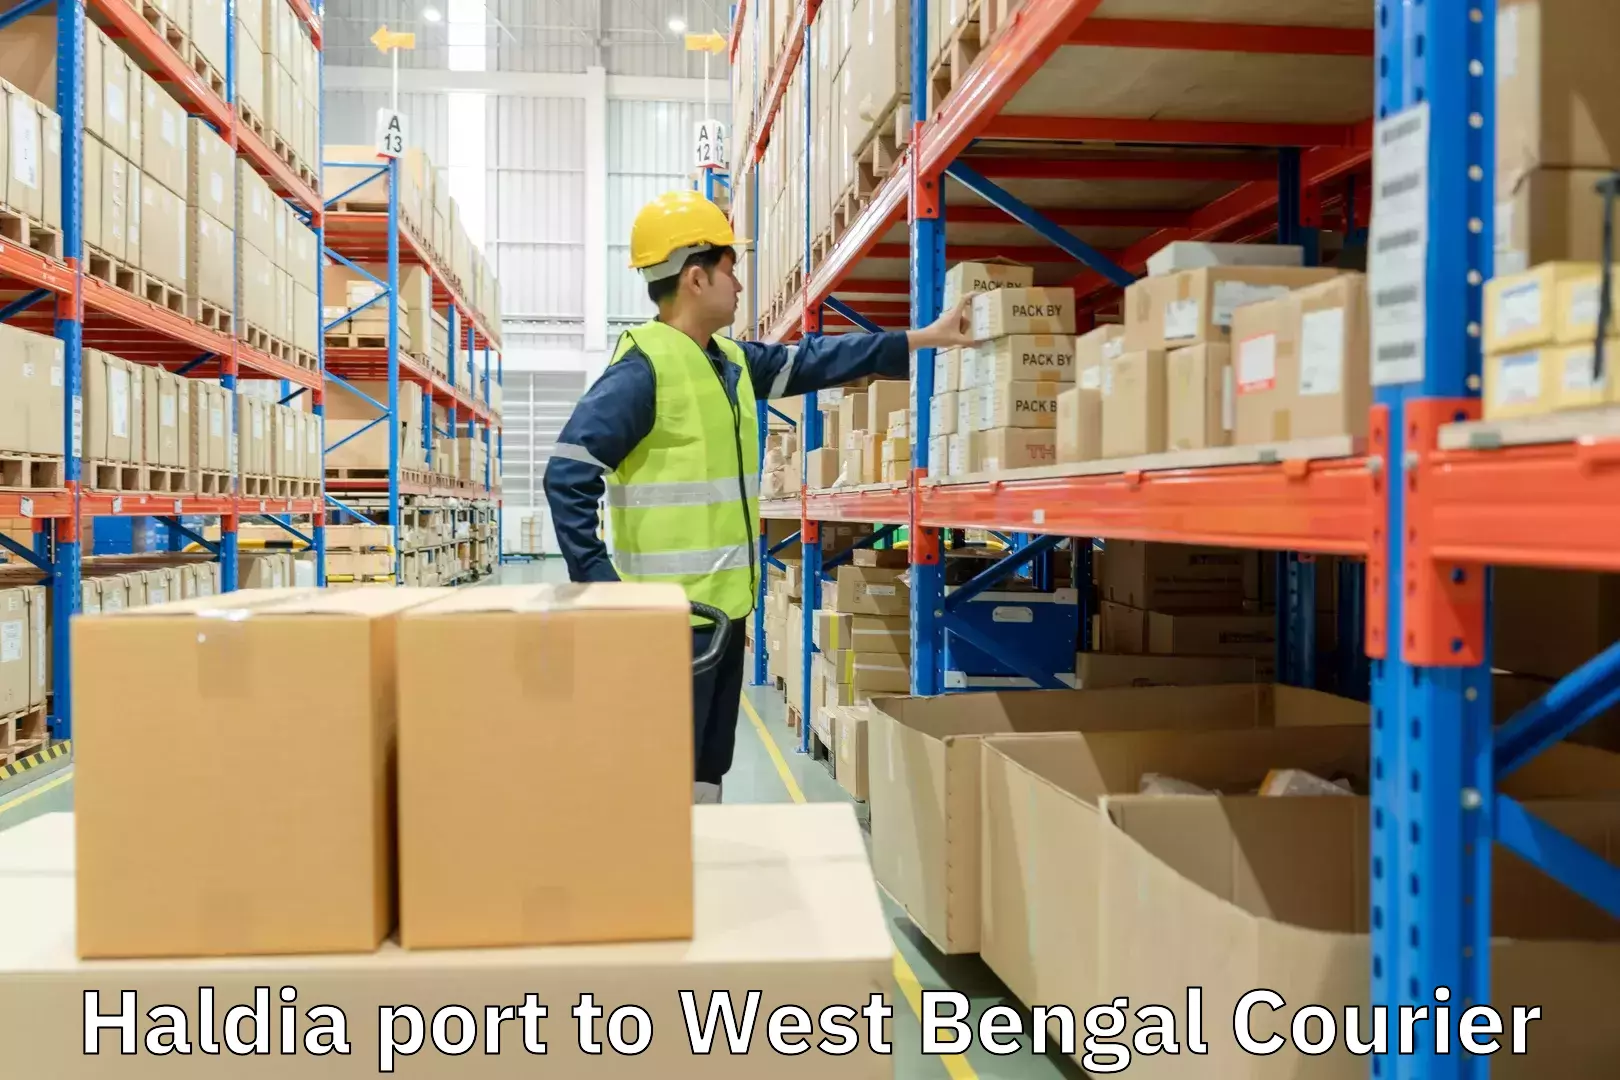 Express courier facilities Haldia port to Midnapore